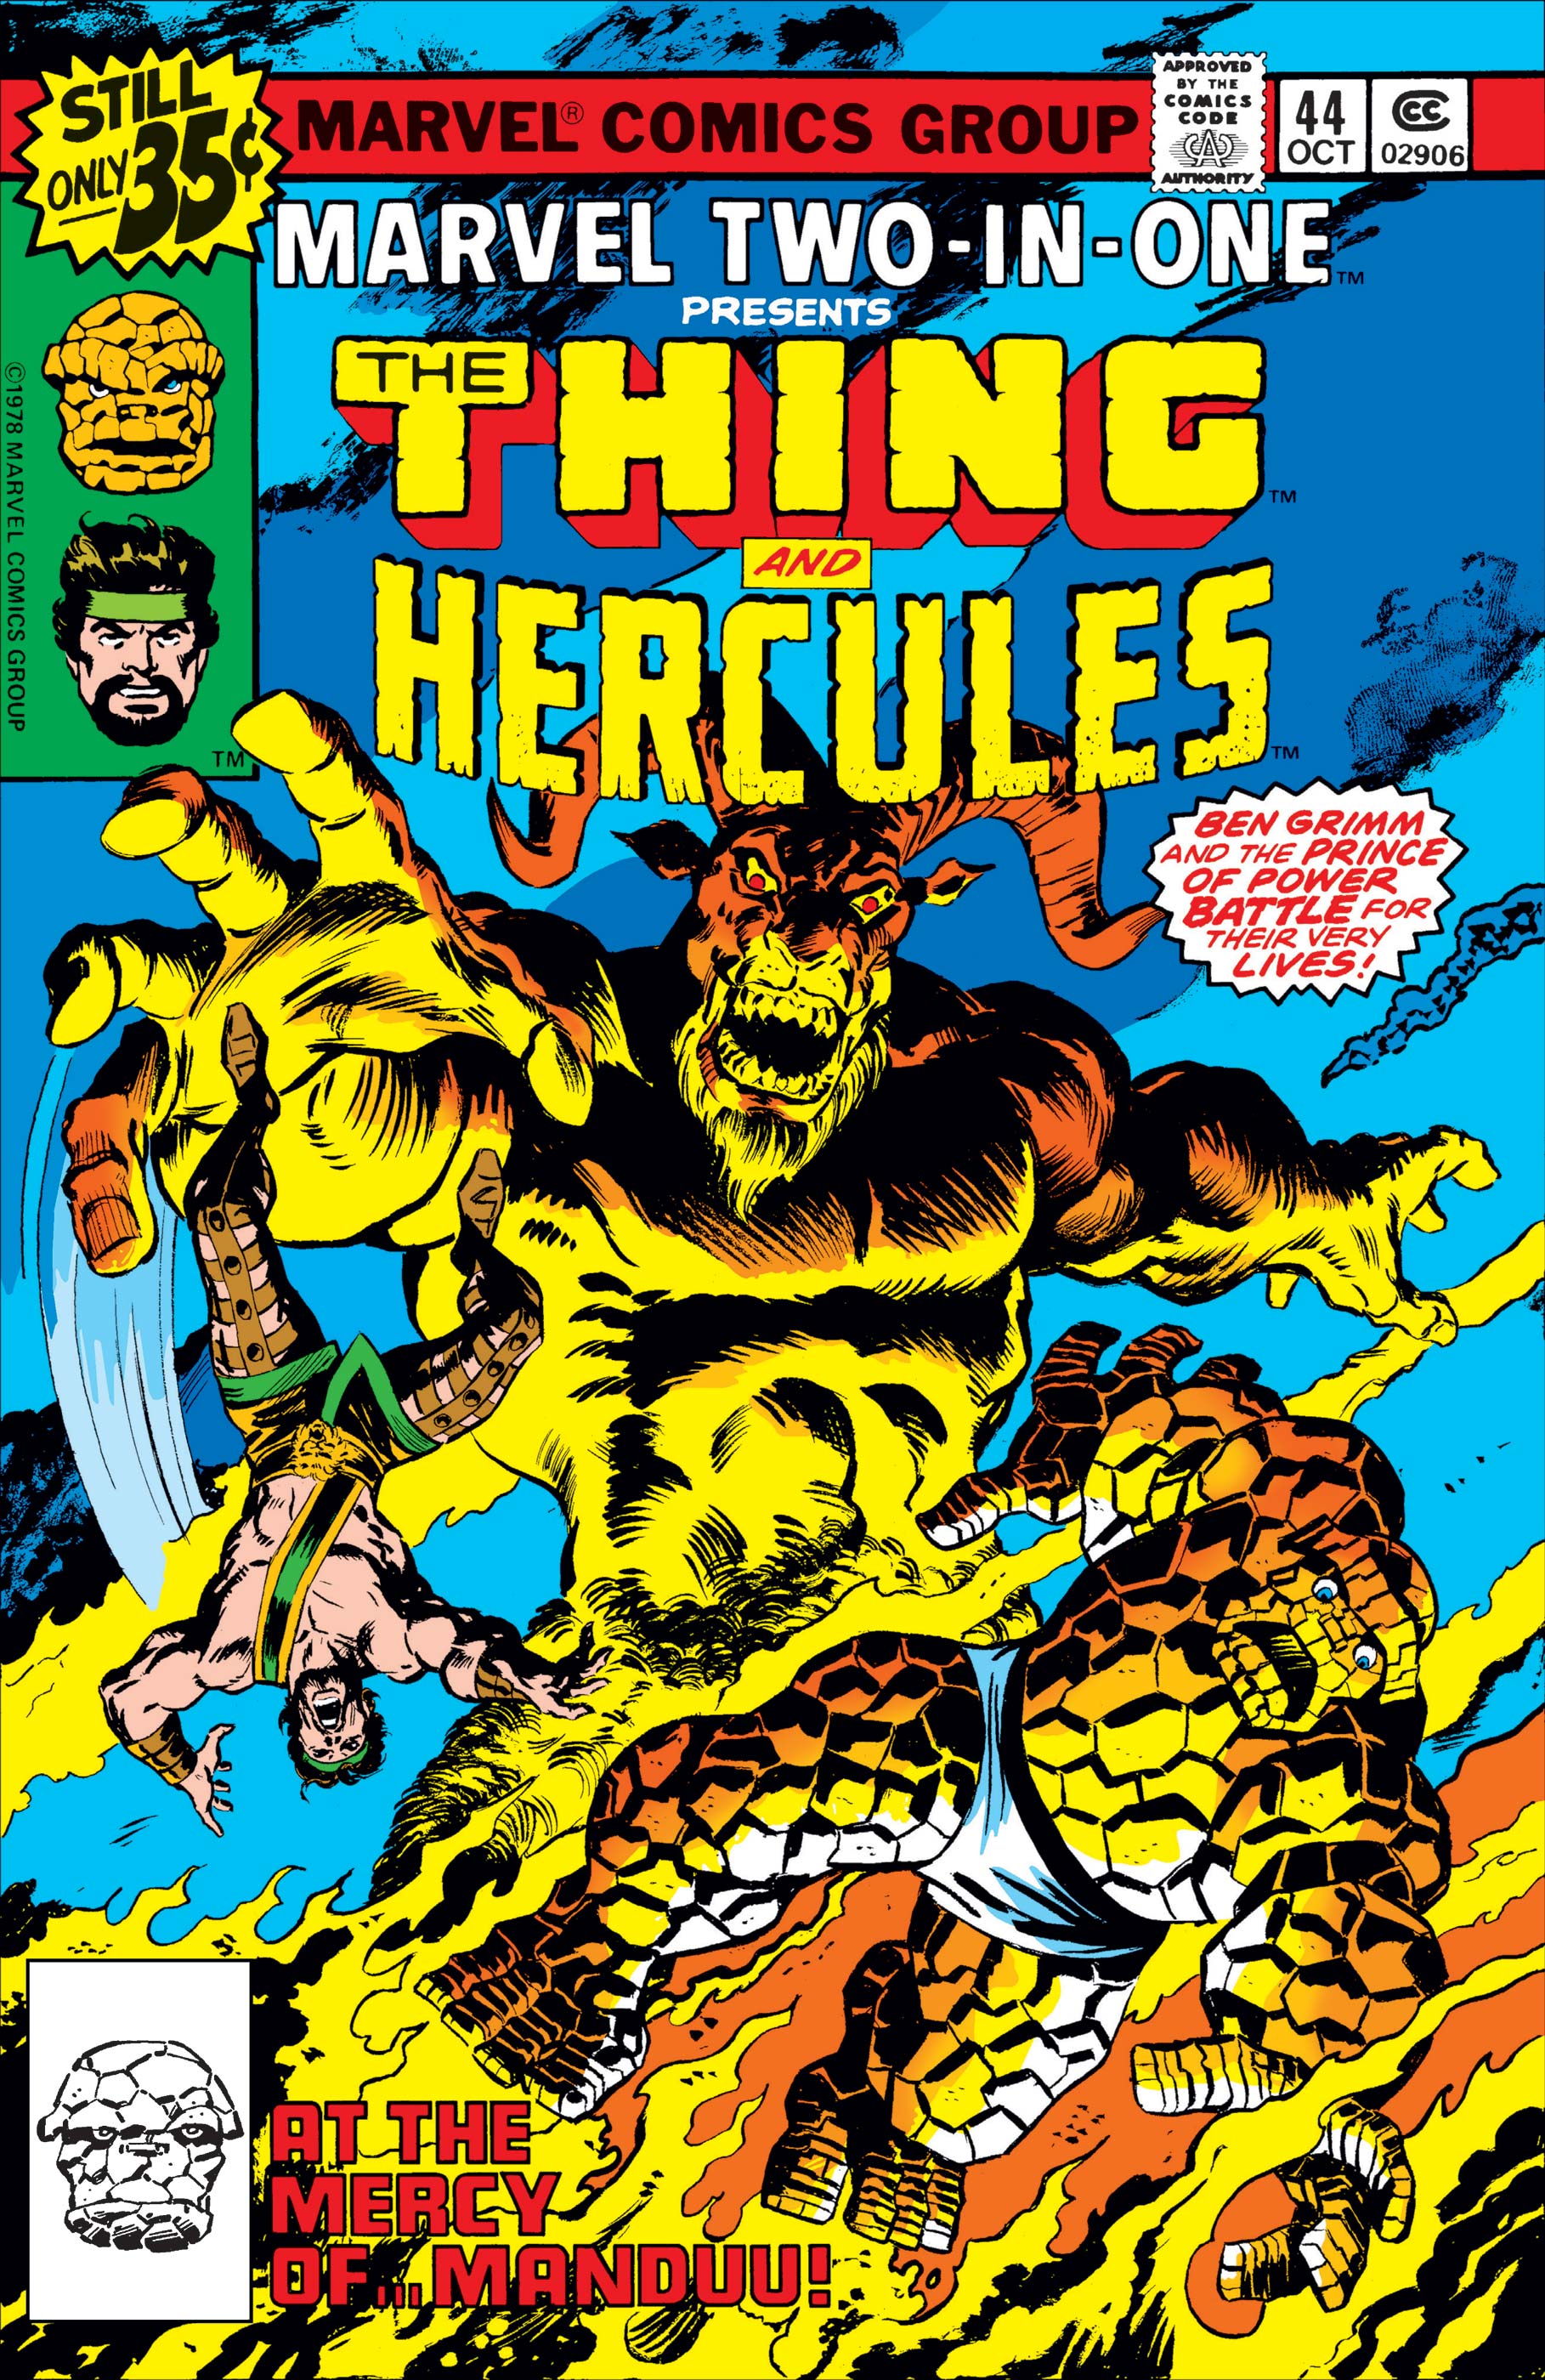 Marvel Two-in-One (1974) #44